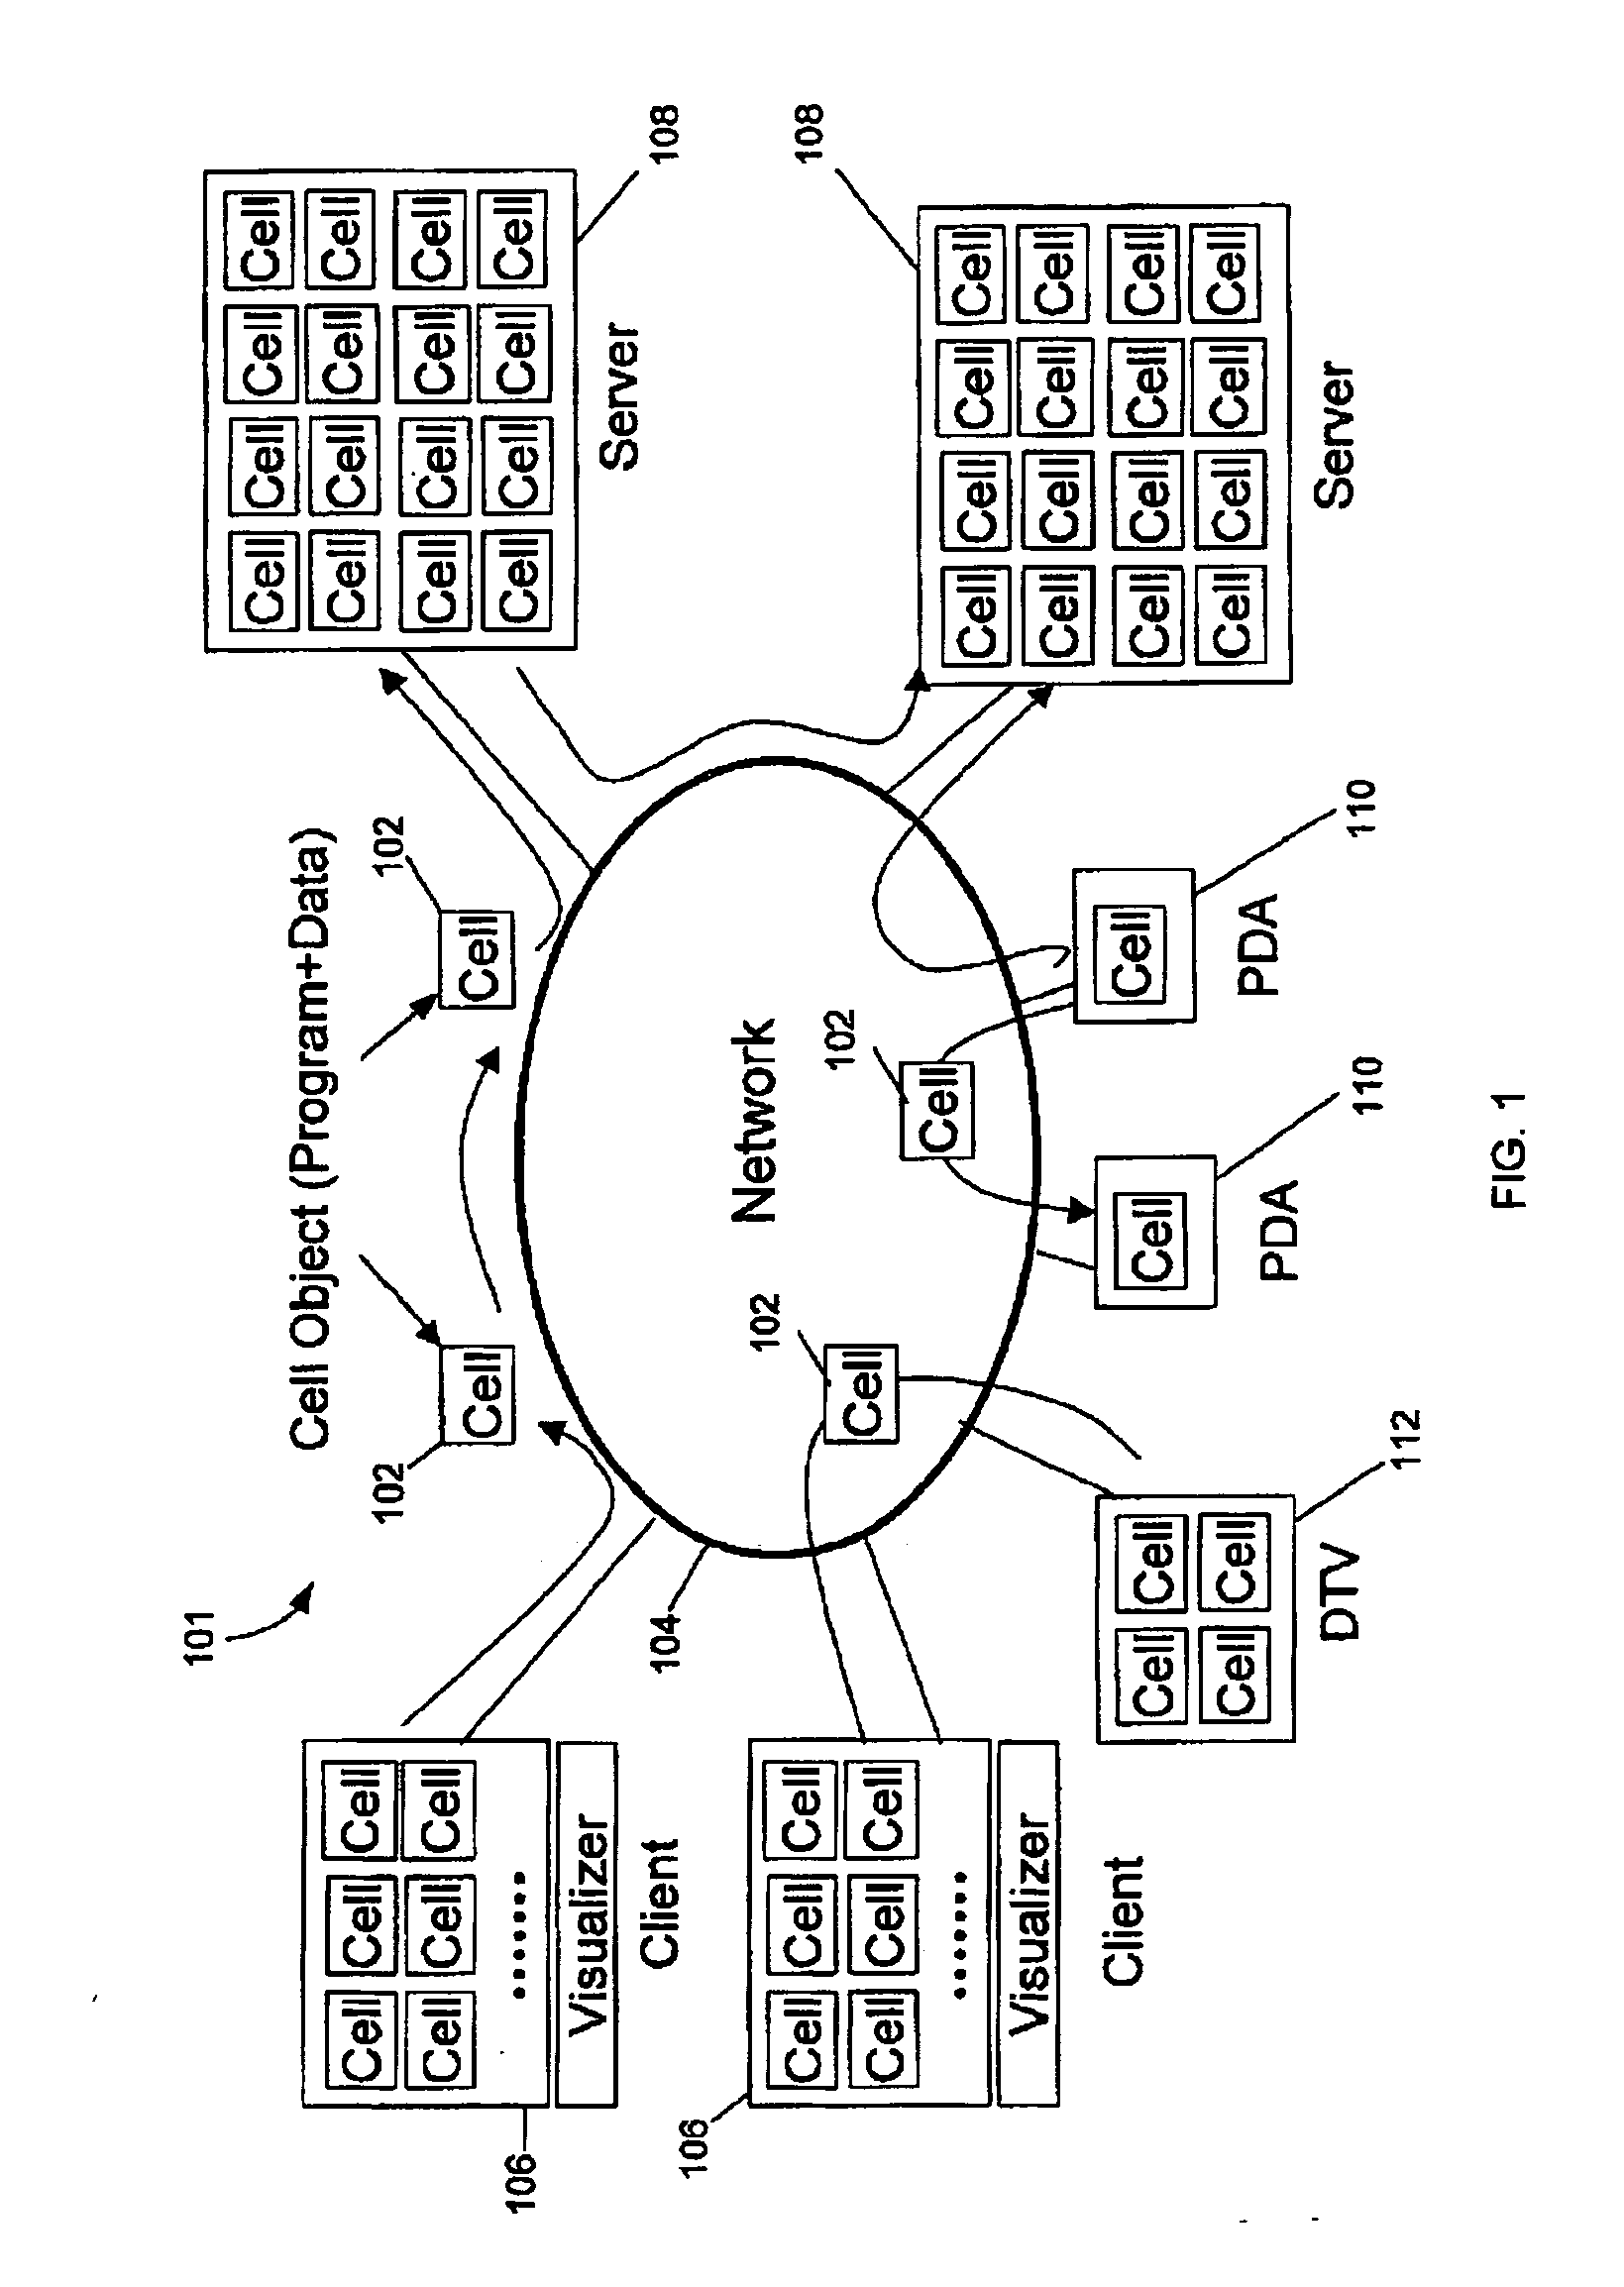 Multi-chip module with third dimension interconnect